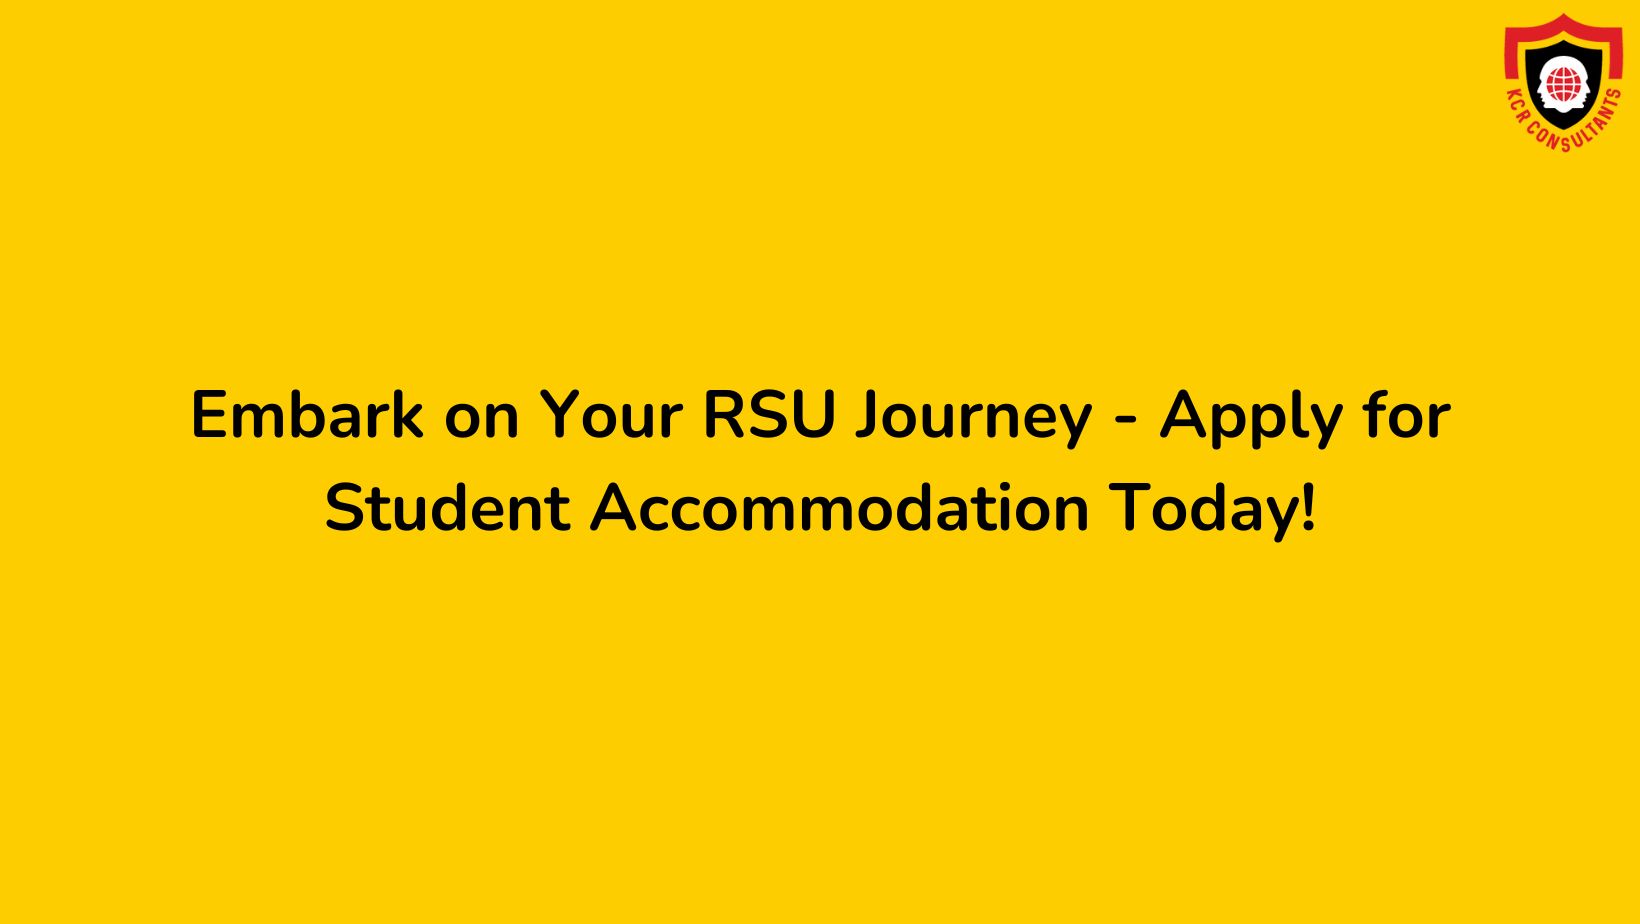 RSU Student Accommodation - KCR CONSULTANTS - Study in Latvia